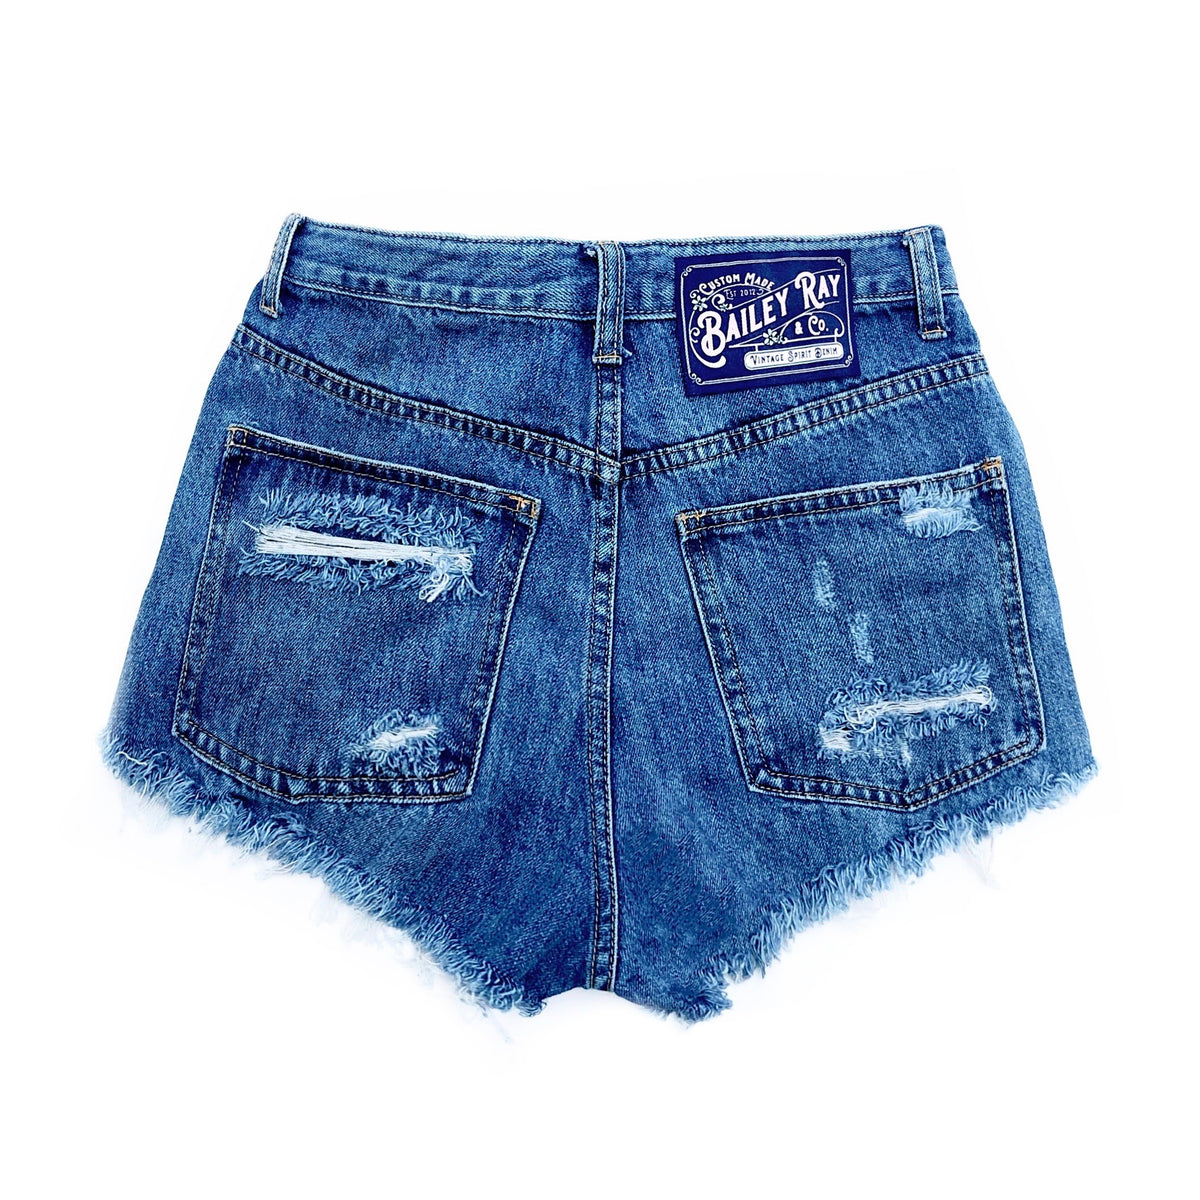 Bailey Ray and Co - Heavily Distressed High Waisted Denim Shorts - The  Fergie